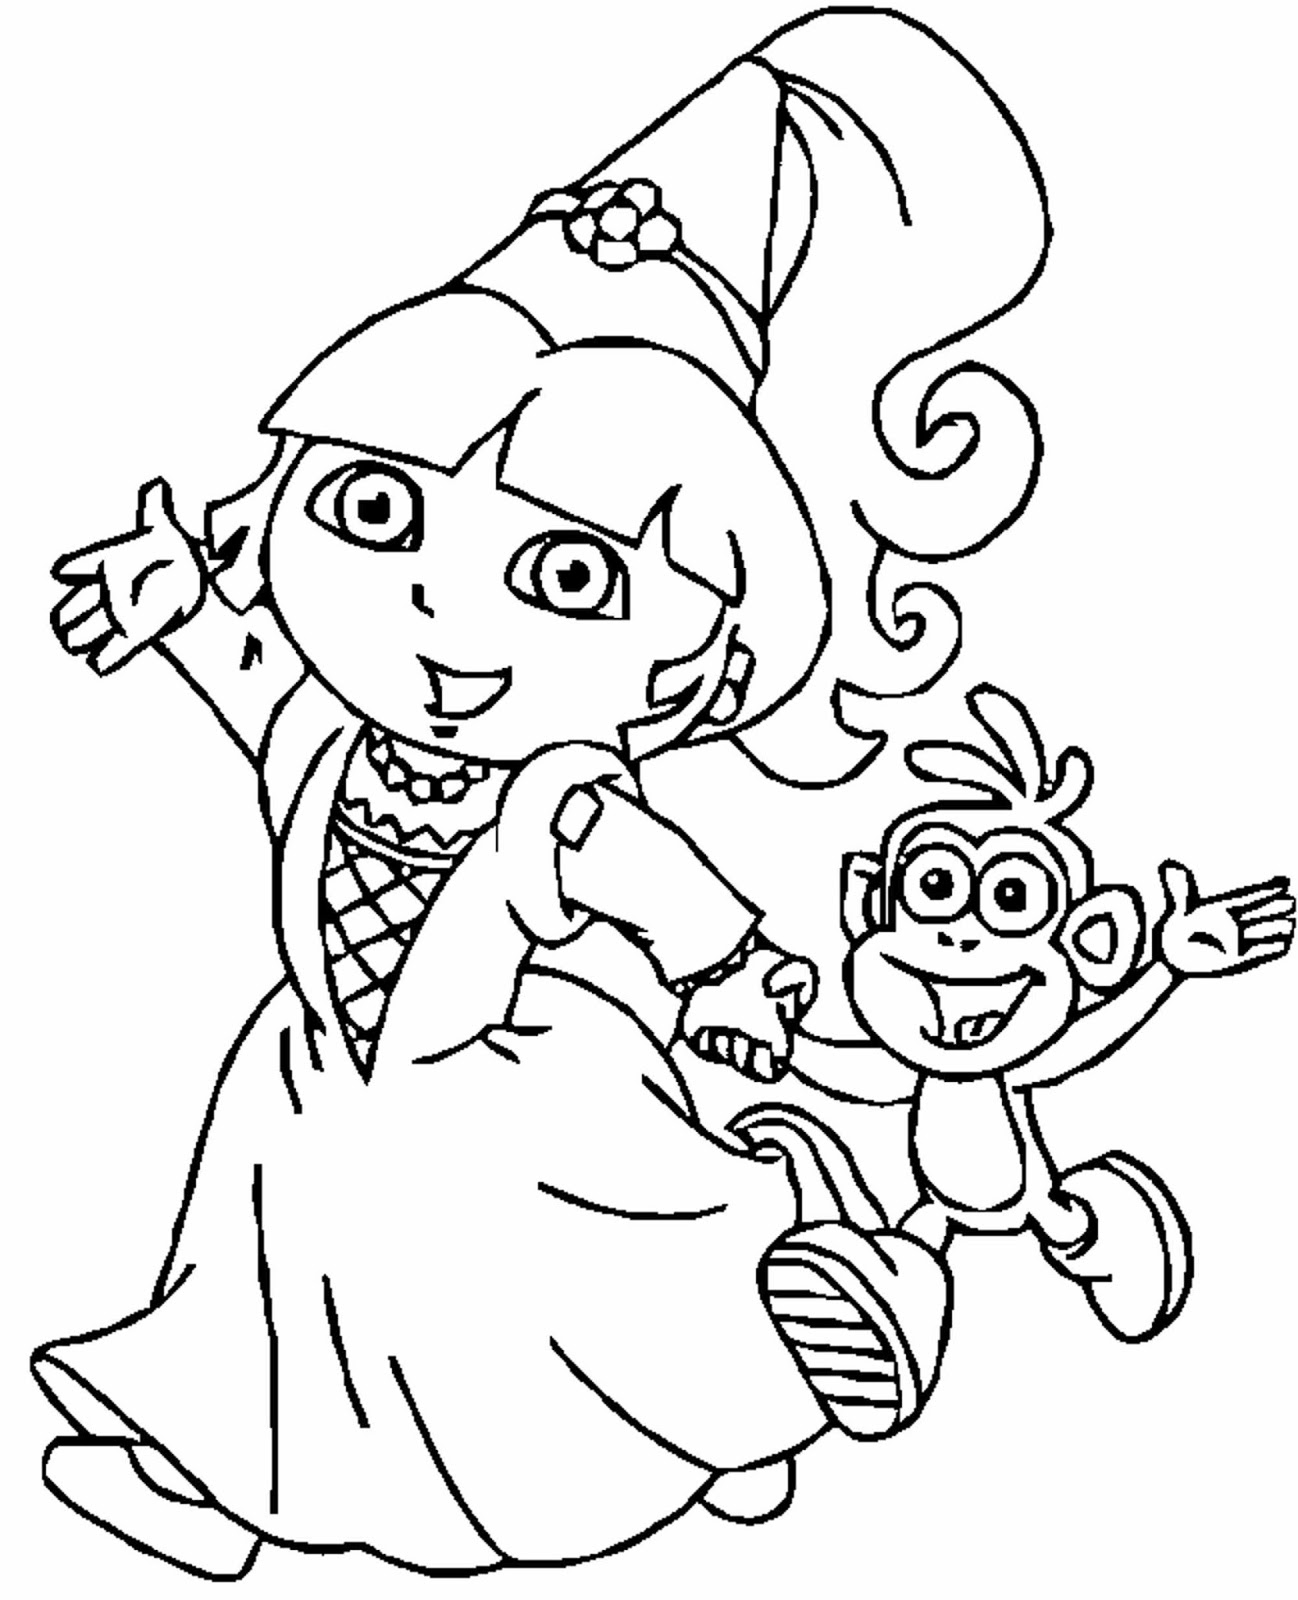 Nick Jr Blaze Coloring Pages at GetColorings.com | Free printable